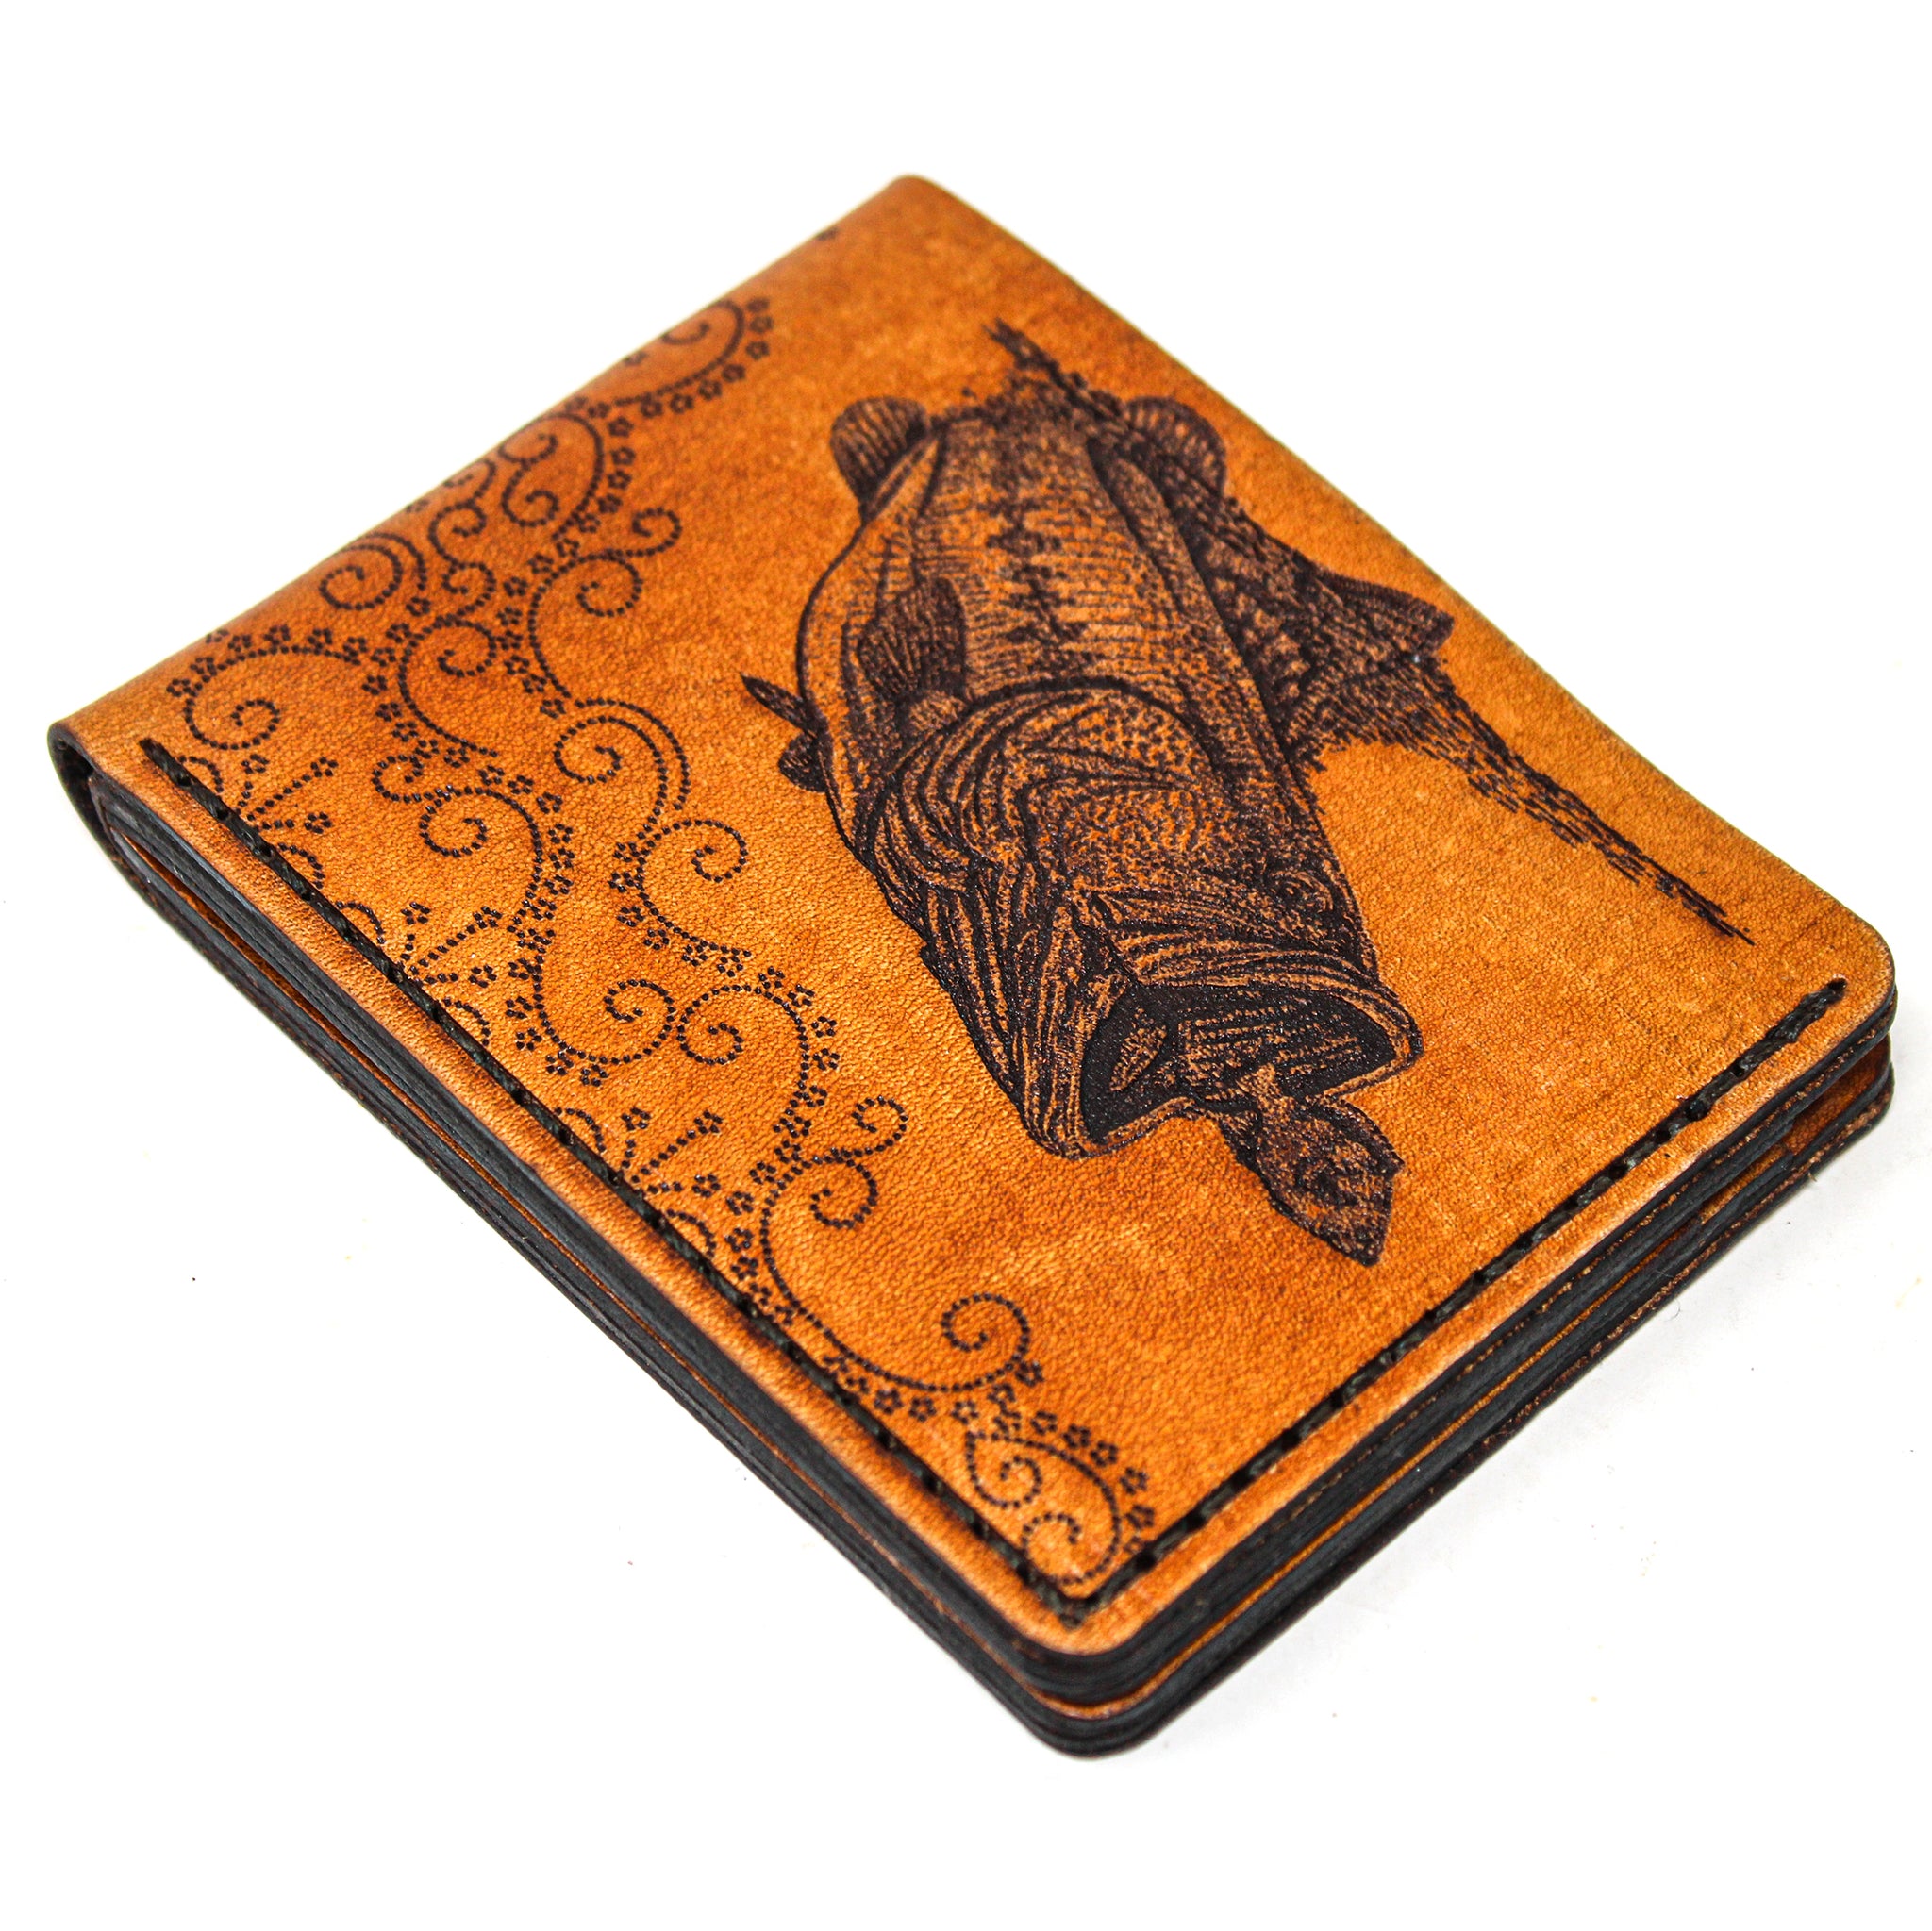 Leather Bill Fold Wallet -  Large Mouth Bass